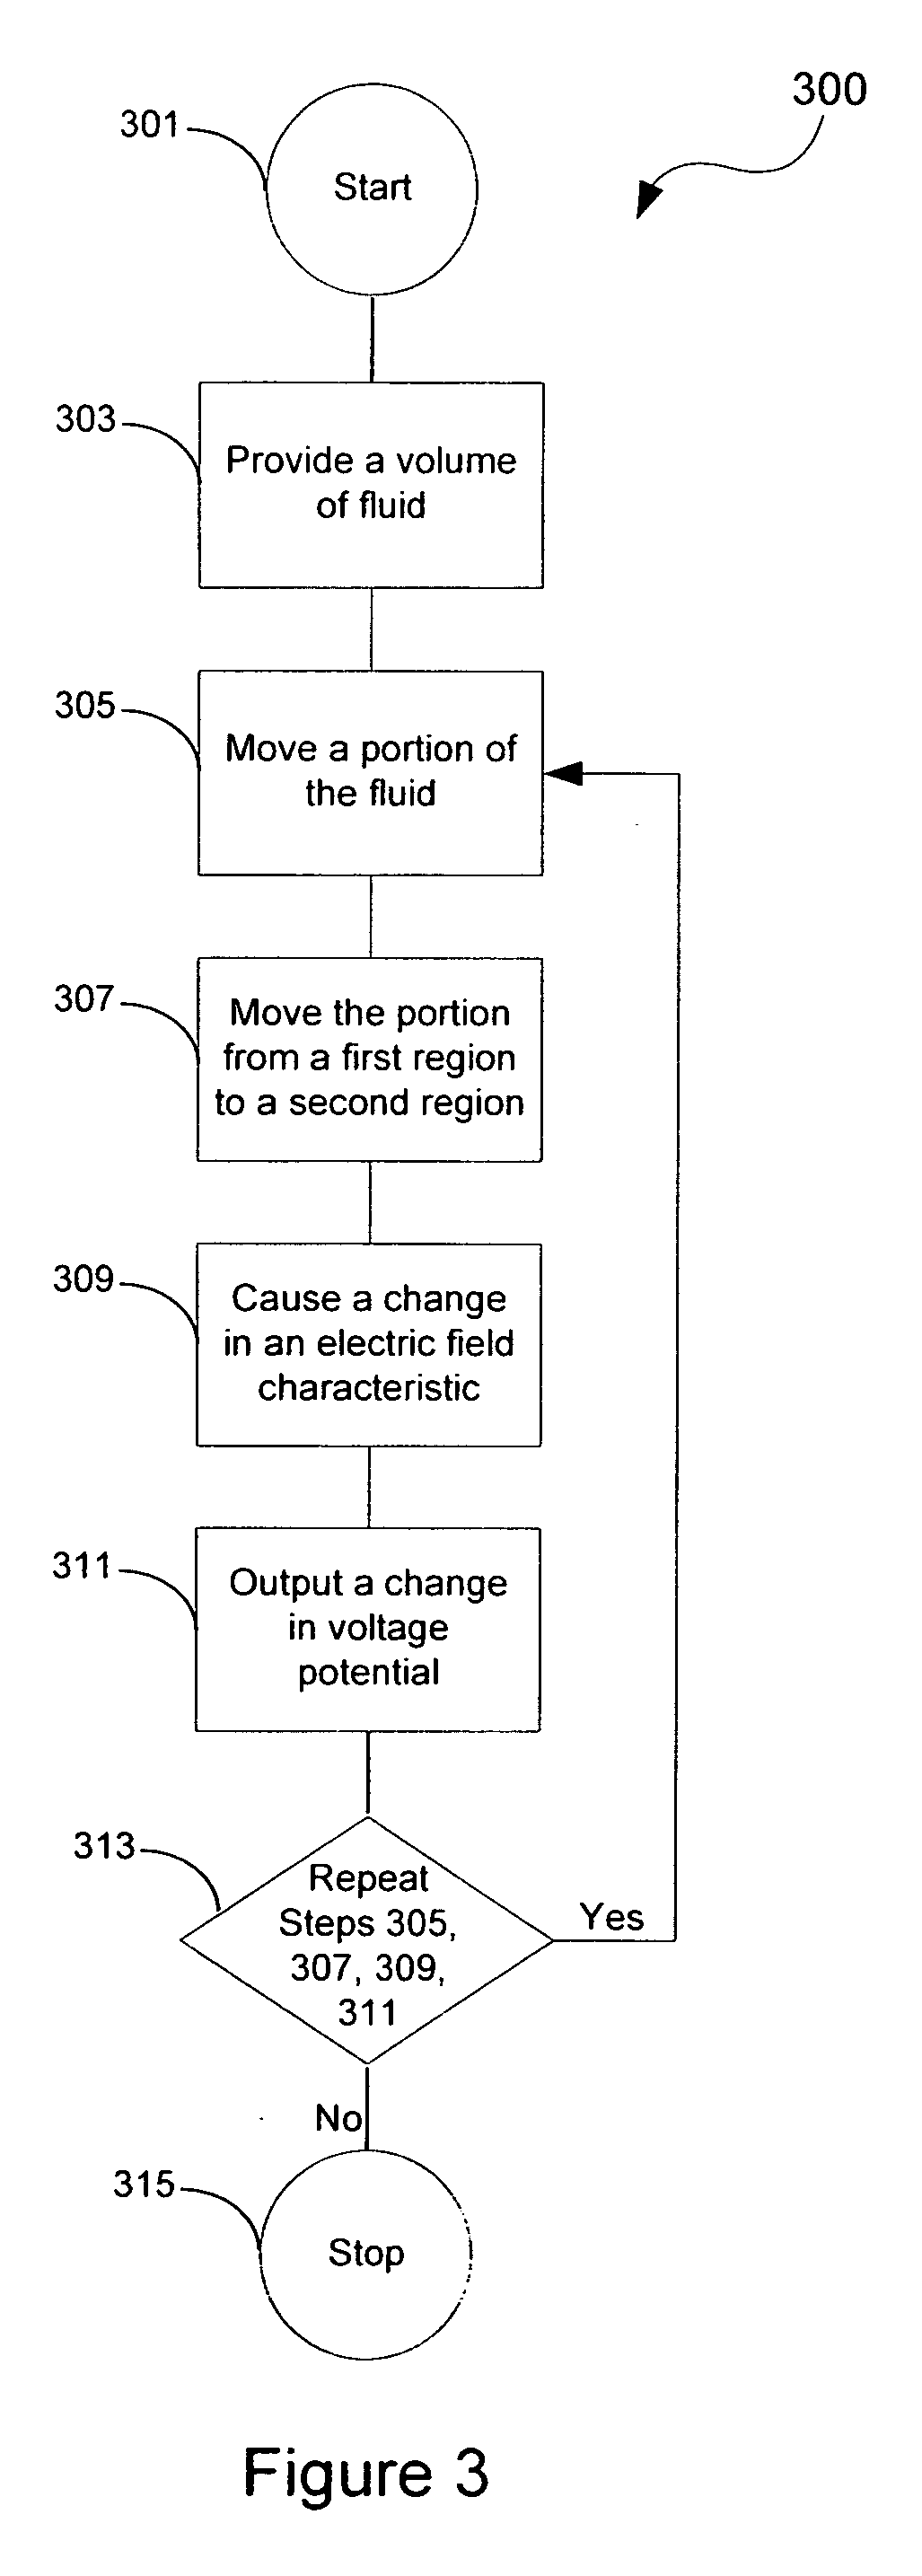 Method and system using liquid dielectric for electrostatic power generation